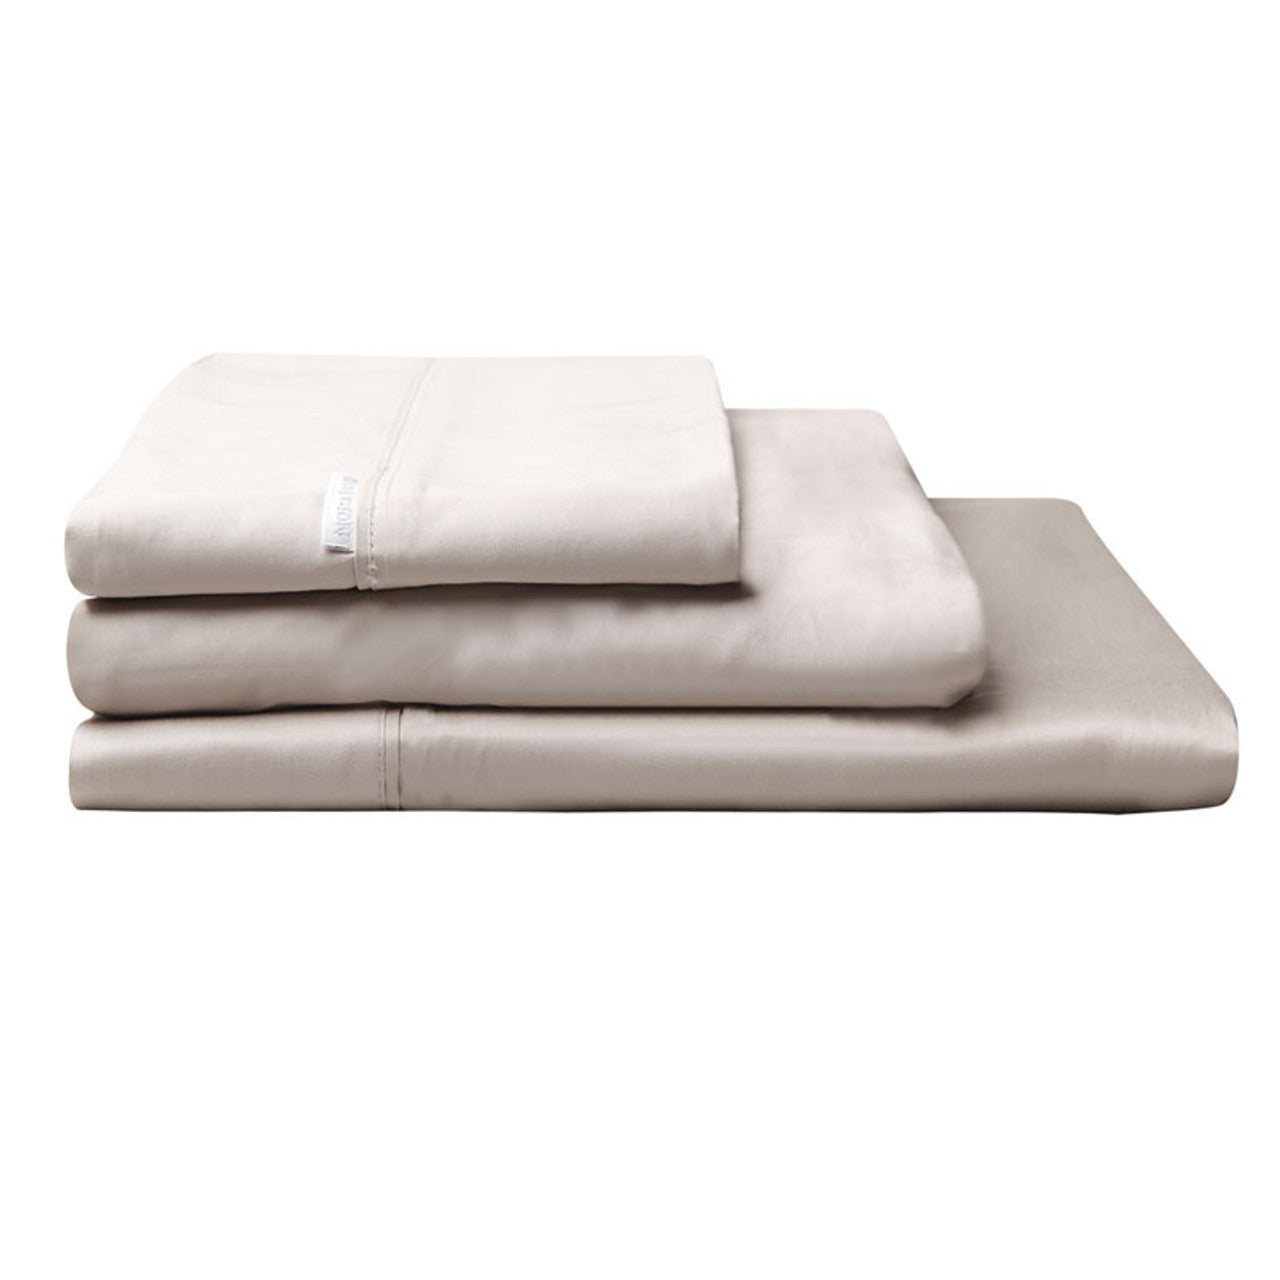 Indulge in the pinnacle of luxury with the Linen Bed Sheet Sets by Logan and Mason. Crafted from pure Egyptian Cotton with an impressive 400 thread count, these sheets offer unparalleled softness and a silky smooth feel. 